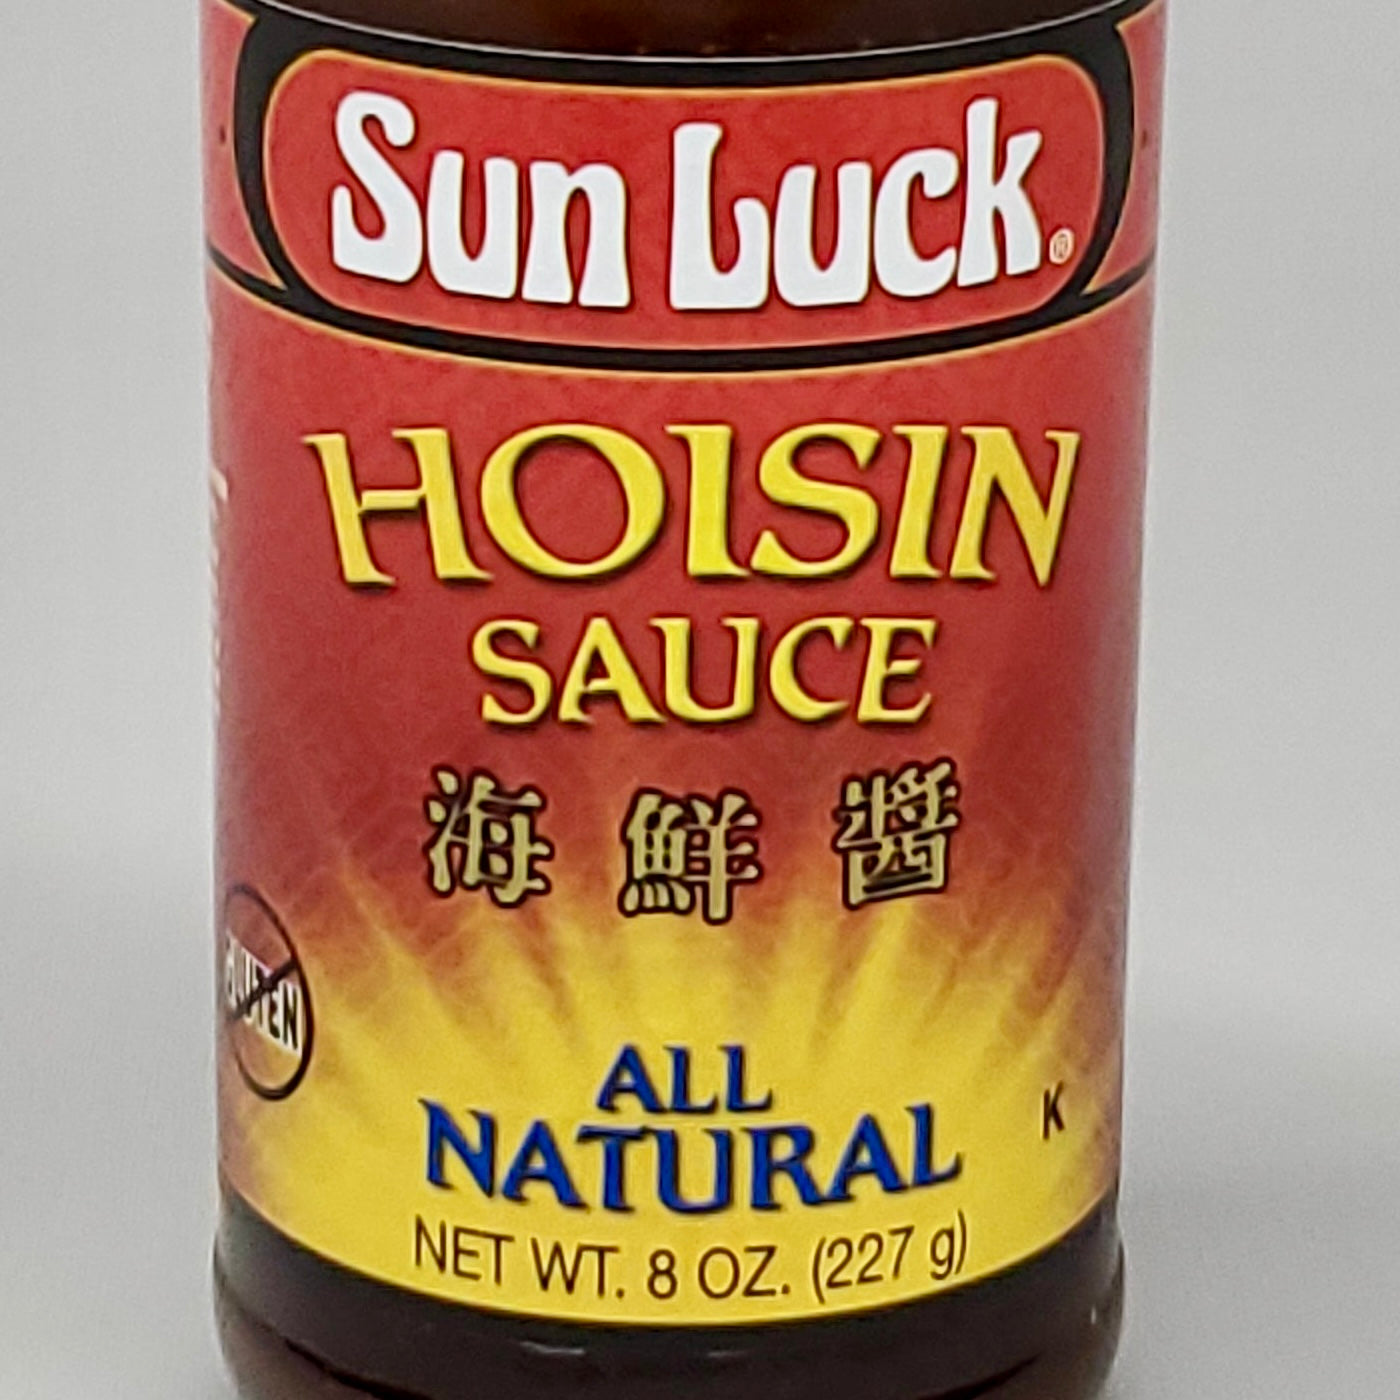 SUN LUCK Hoisin Sauce Pack of 6 All Natural 8 OZ. Best By 9/19/24 (New)